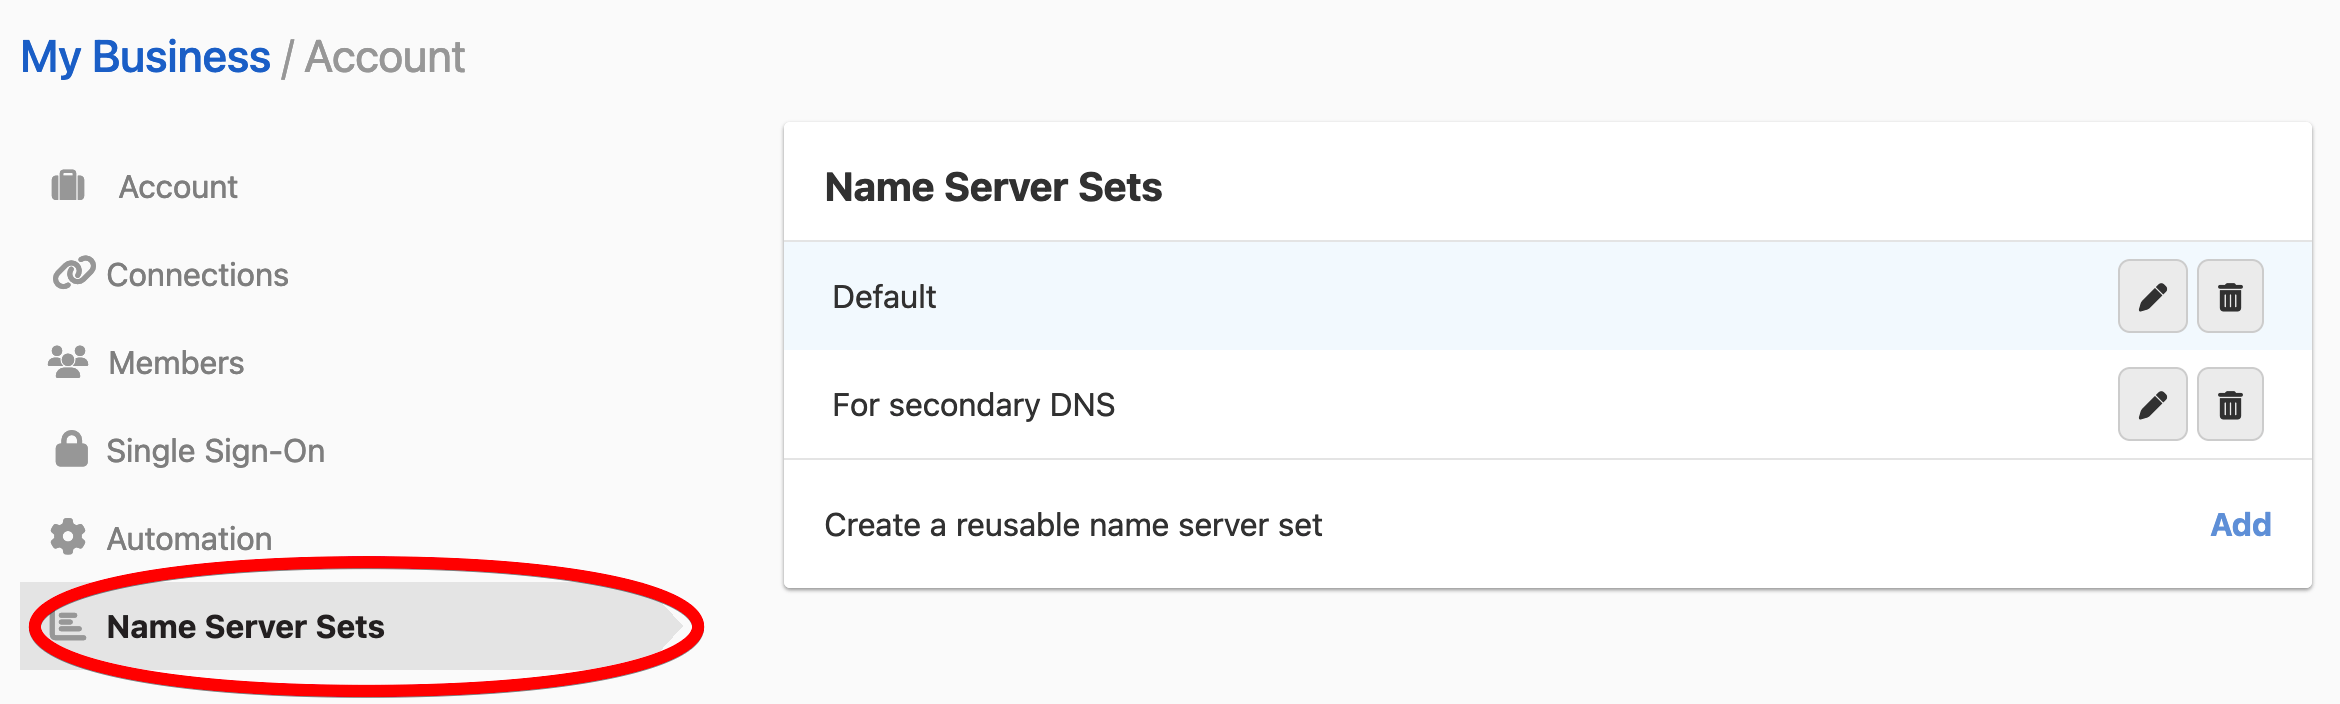 Name server sets on Account page